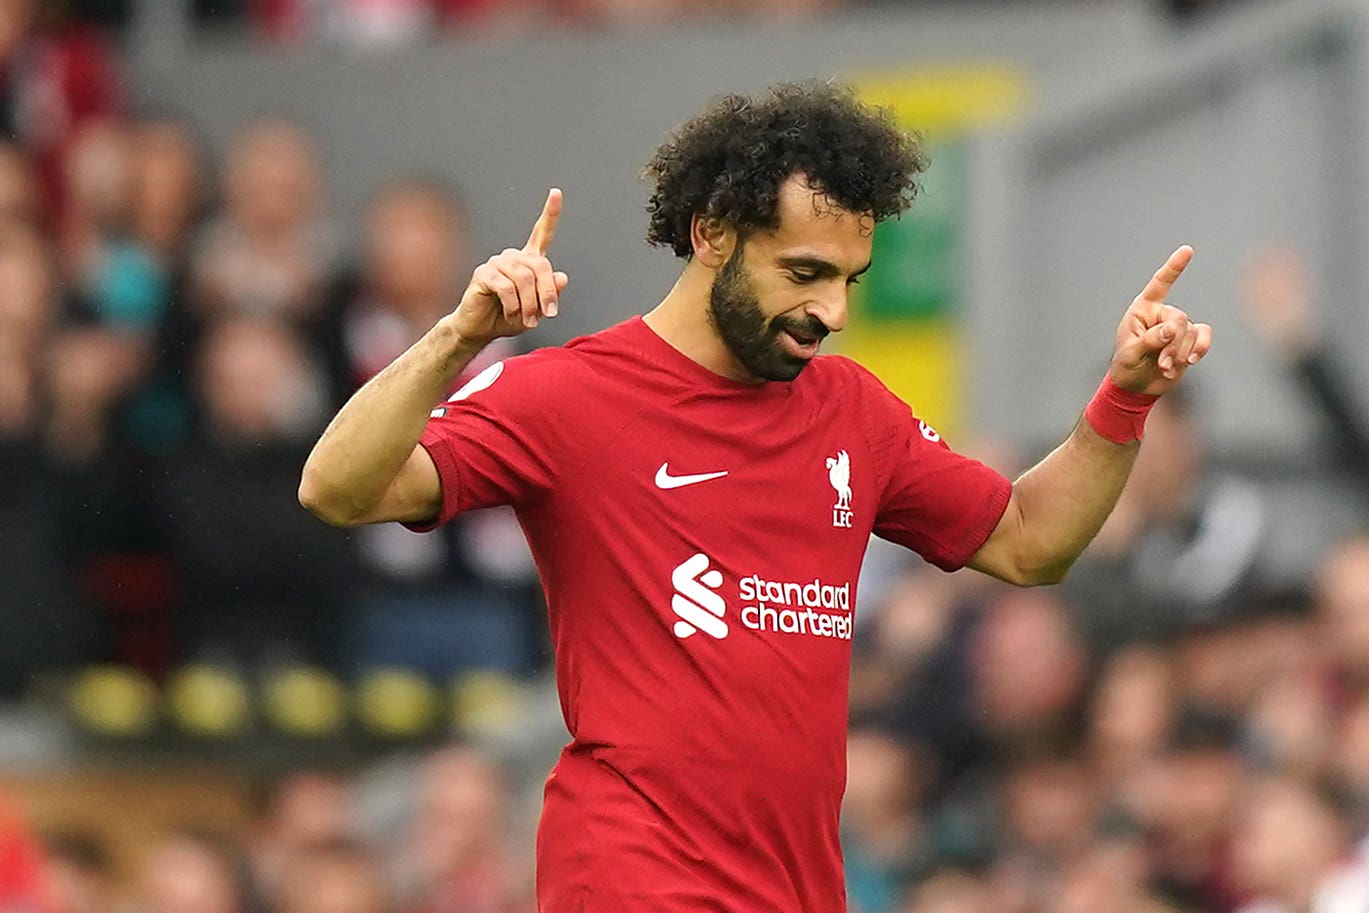 Liverpool’s Mohamed Salah hit another Anfield landmark on Saturday